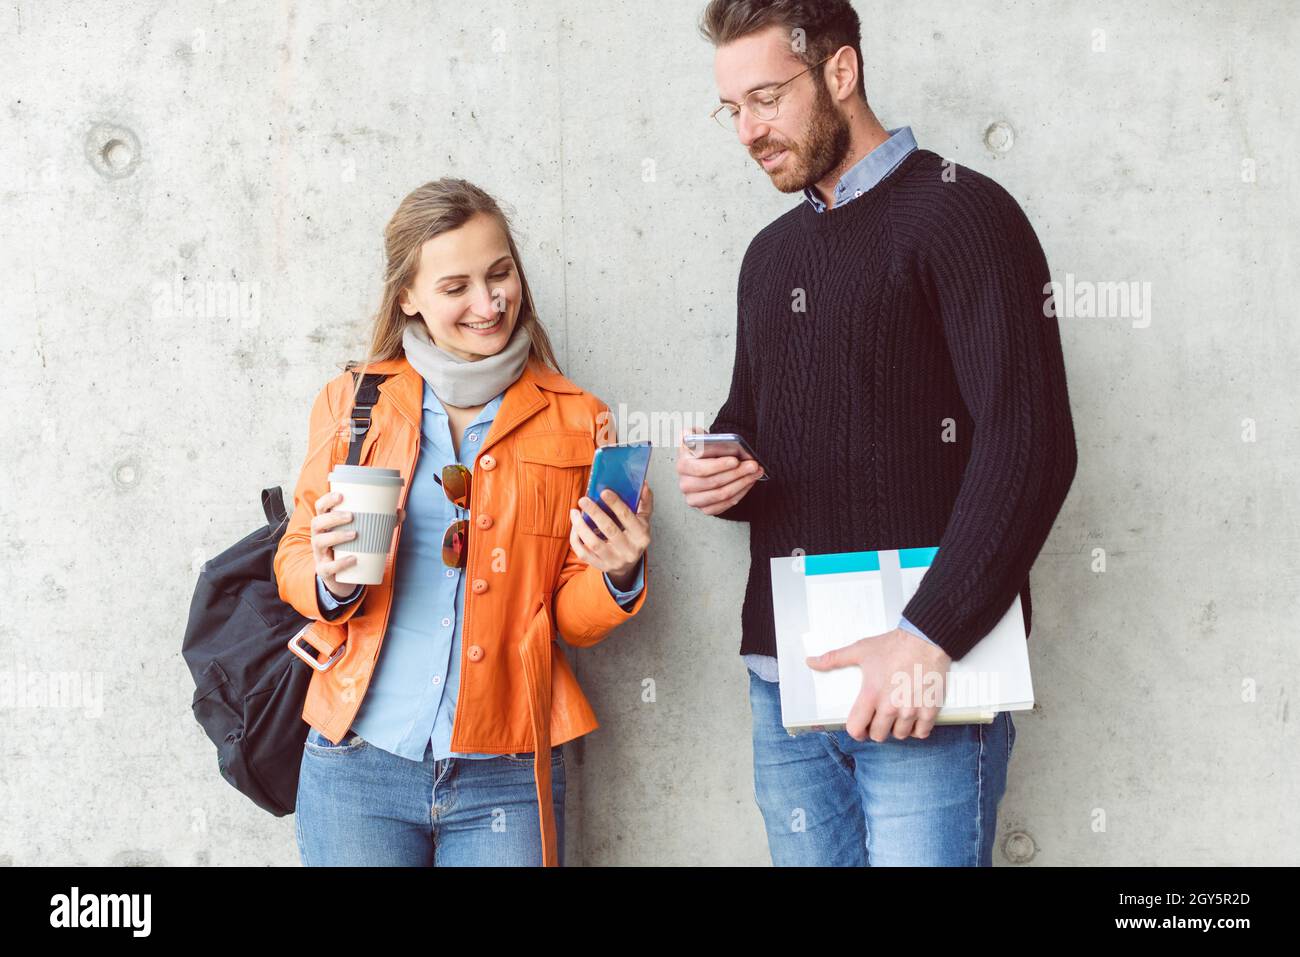 Two students with phone and books standing in front of concrete wall on campus Stock Photo